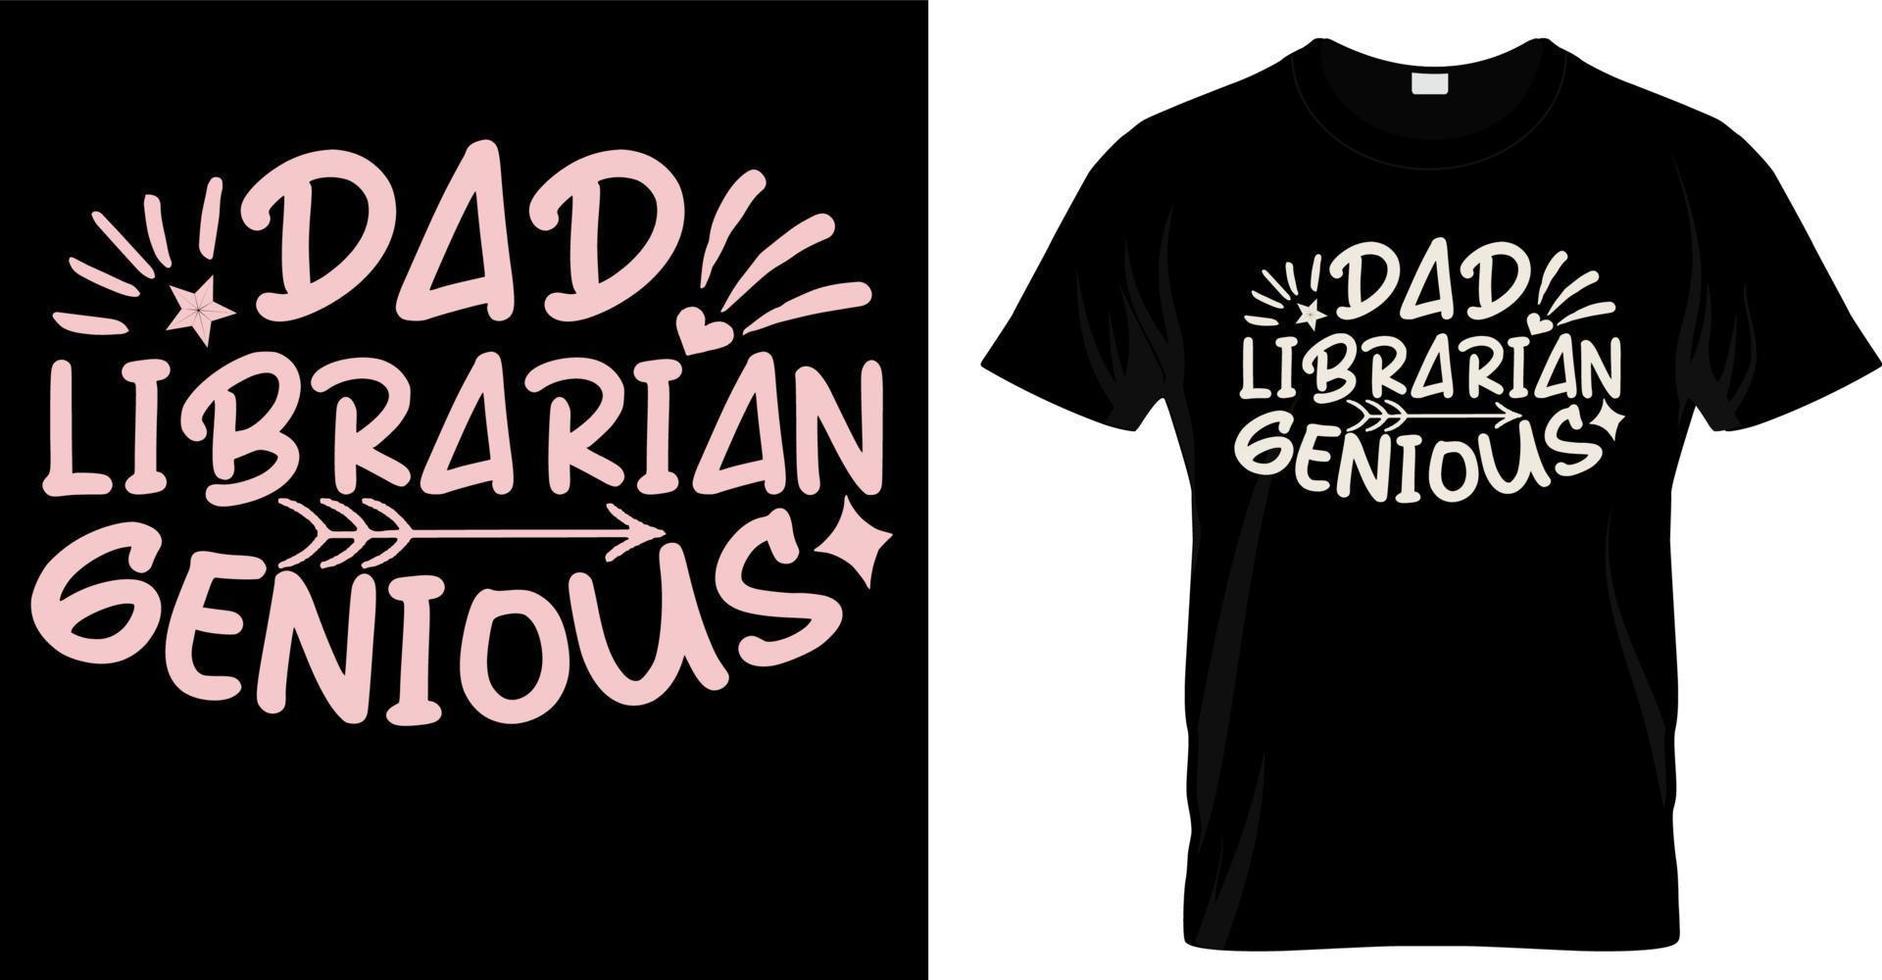 Dad librarian genius. Motivation hand drawn lettering quote about books and reading. Love reading book phrases vintage vector illustration. Perfect for t shirt, print, posters.